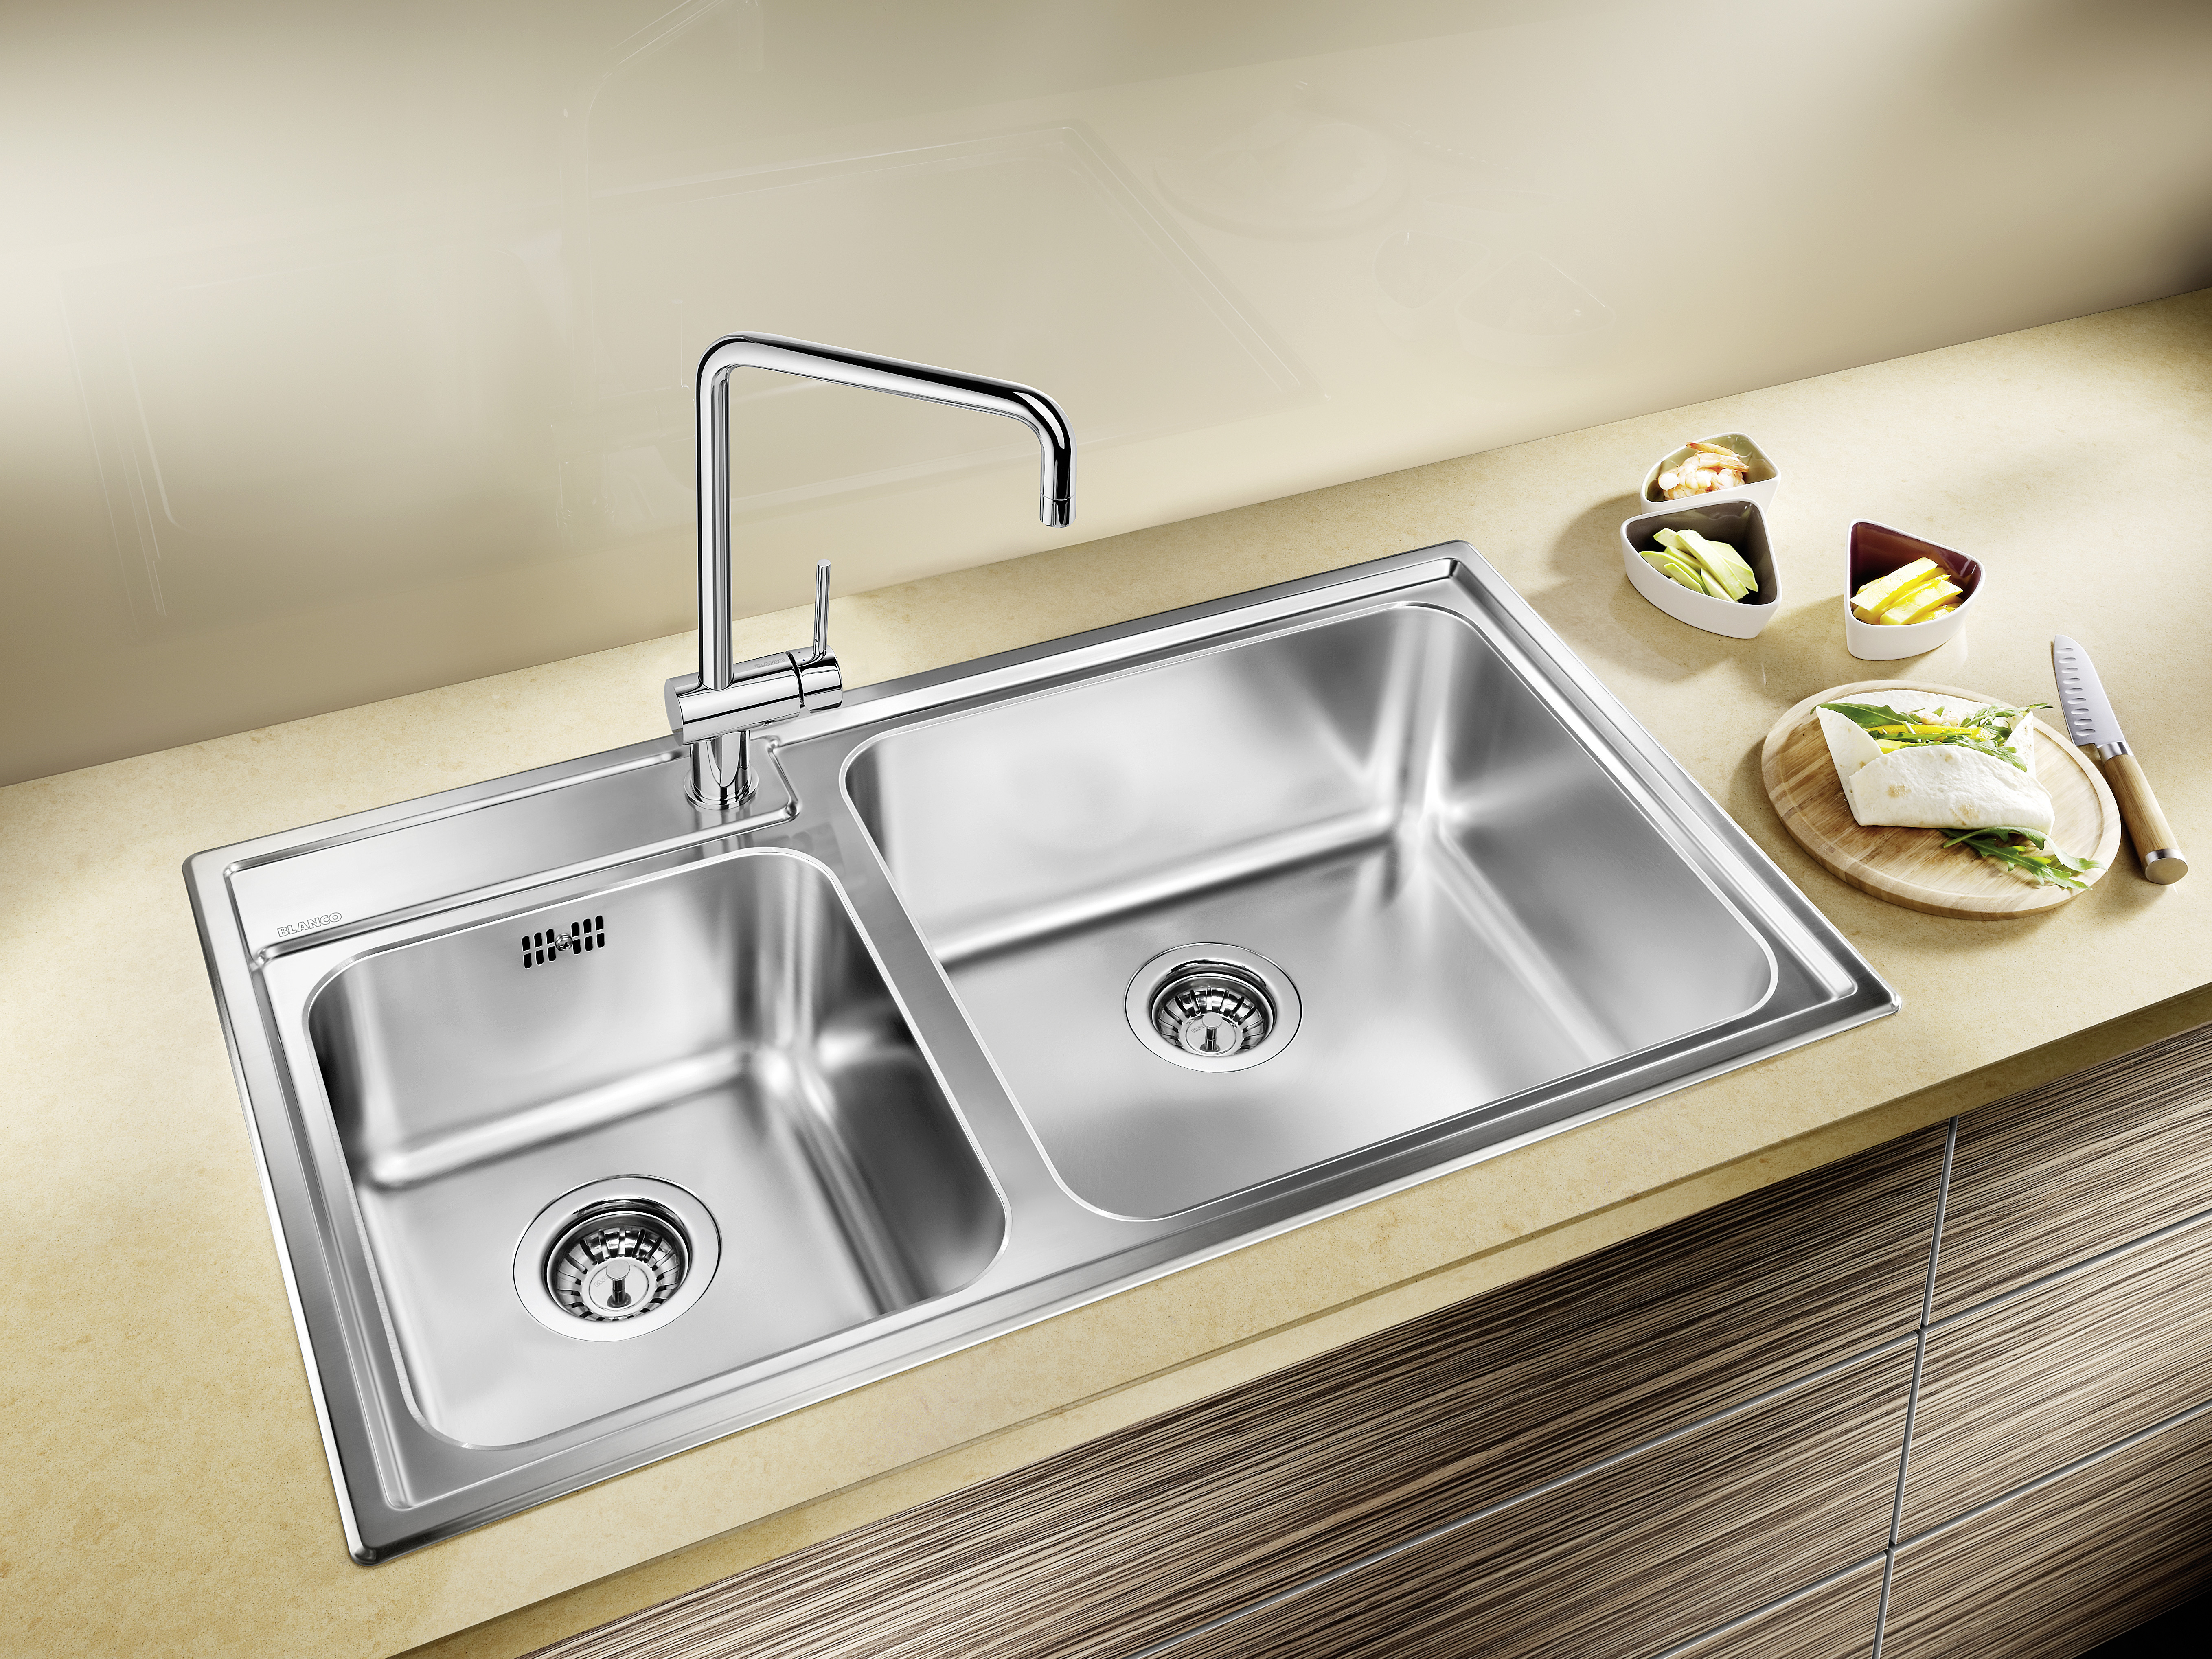 Narrow taps can also be combined with any sink. 